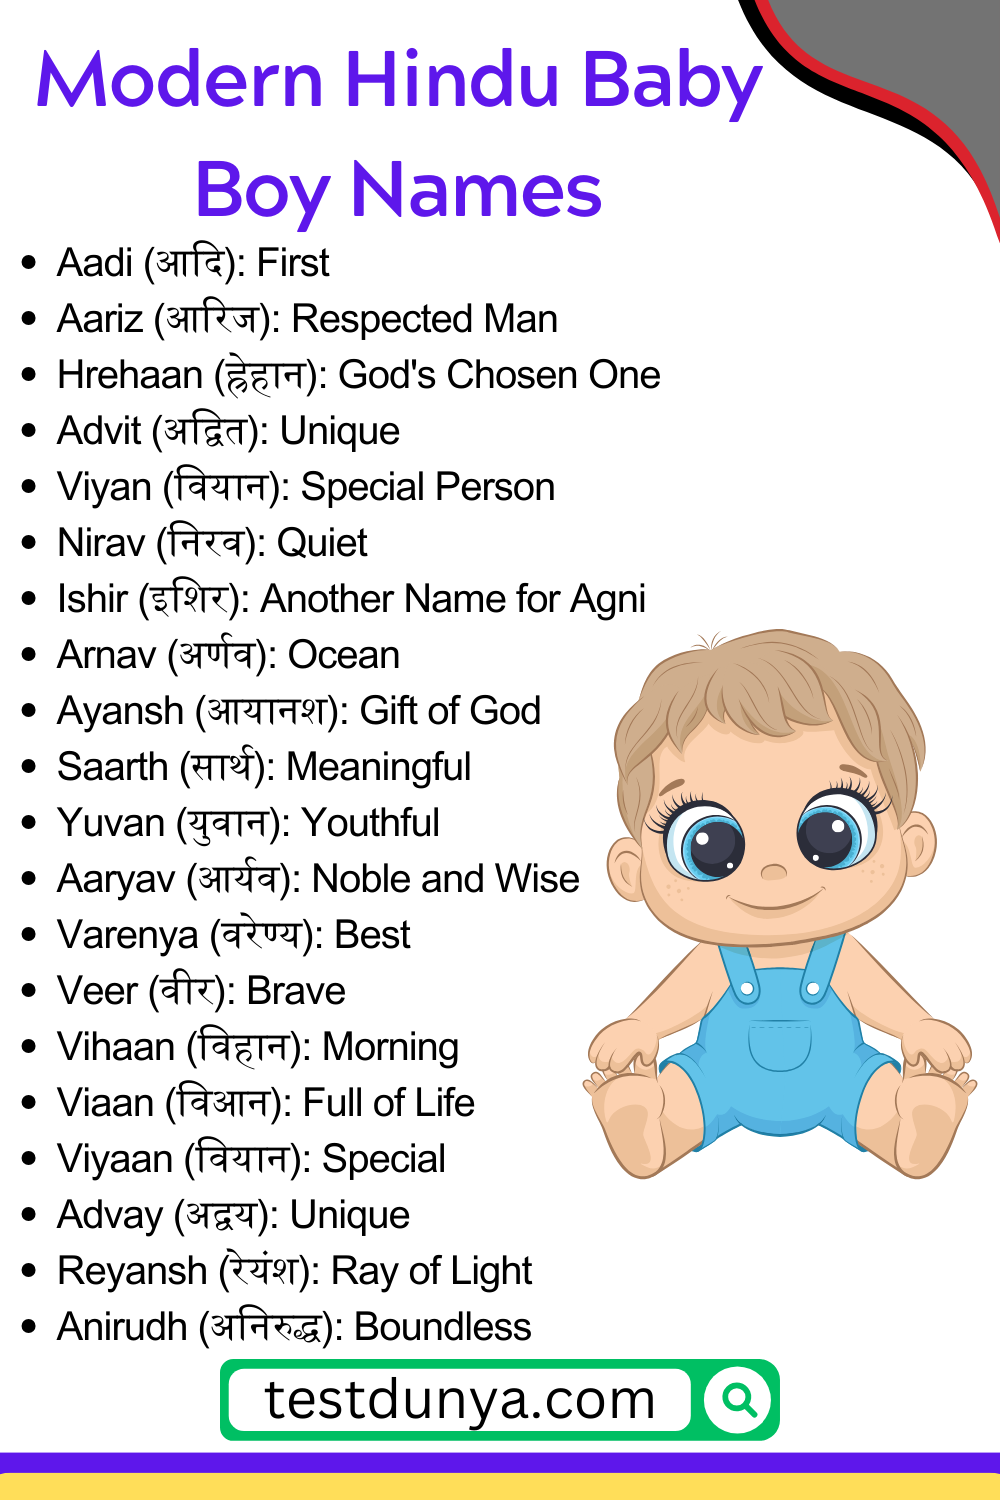 Hindu Modern Boy Names with Meanings